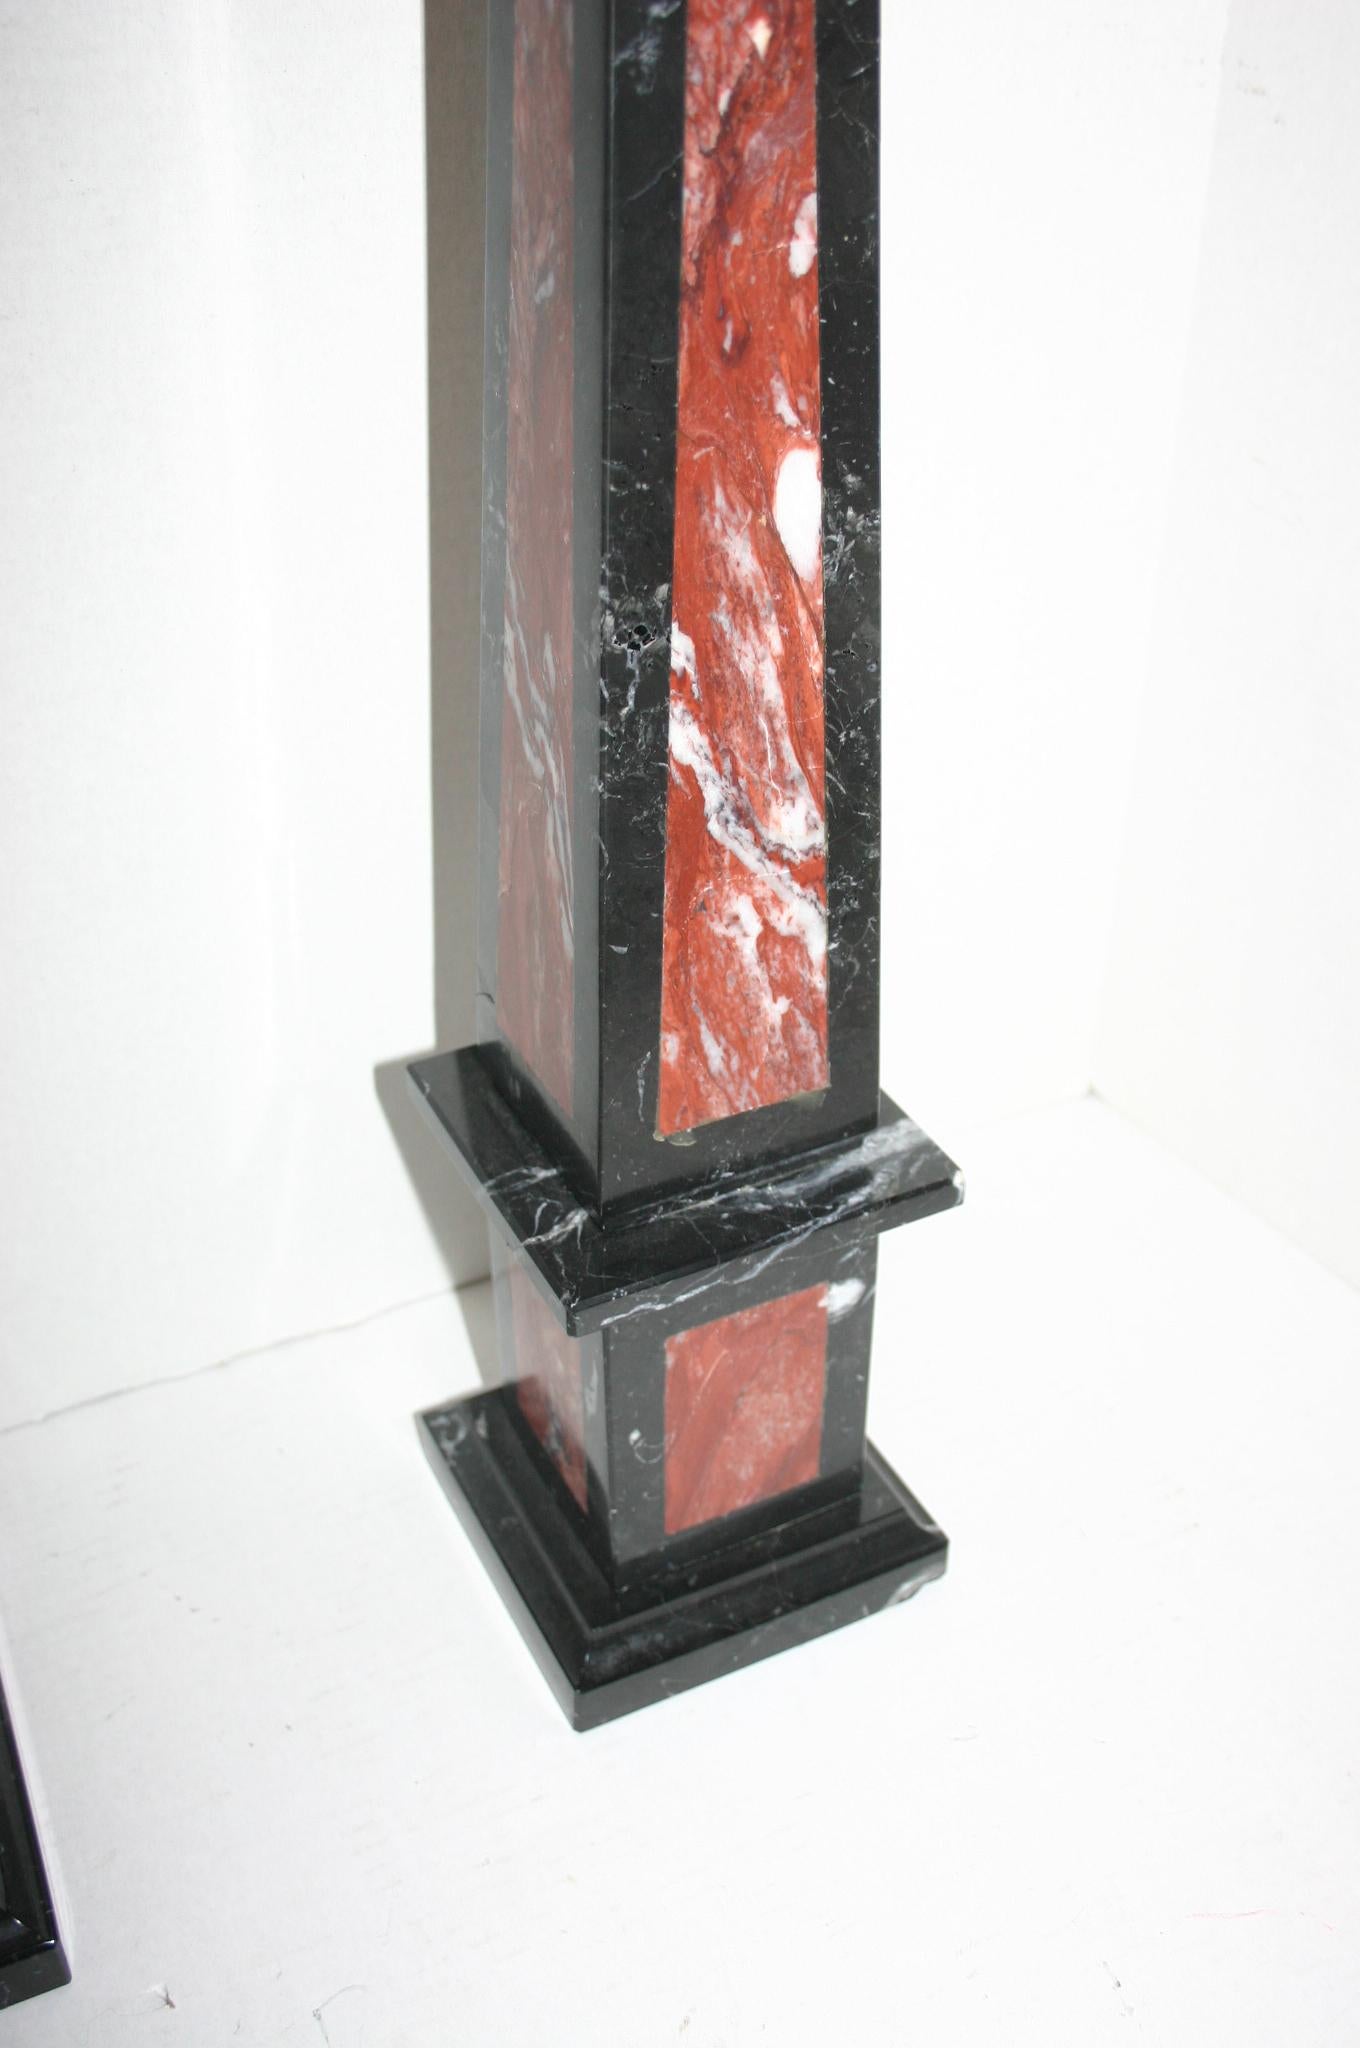 Pair of circa 1940s Italian marble obelisks, with black and red marble on a pedestal base.

Measurements:
Height 25